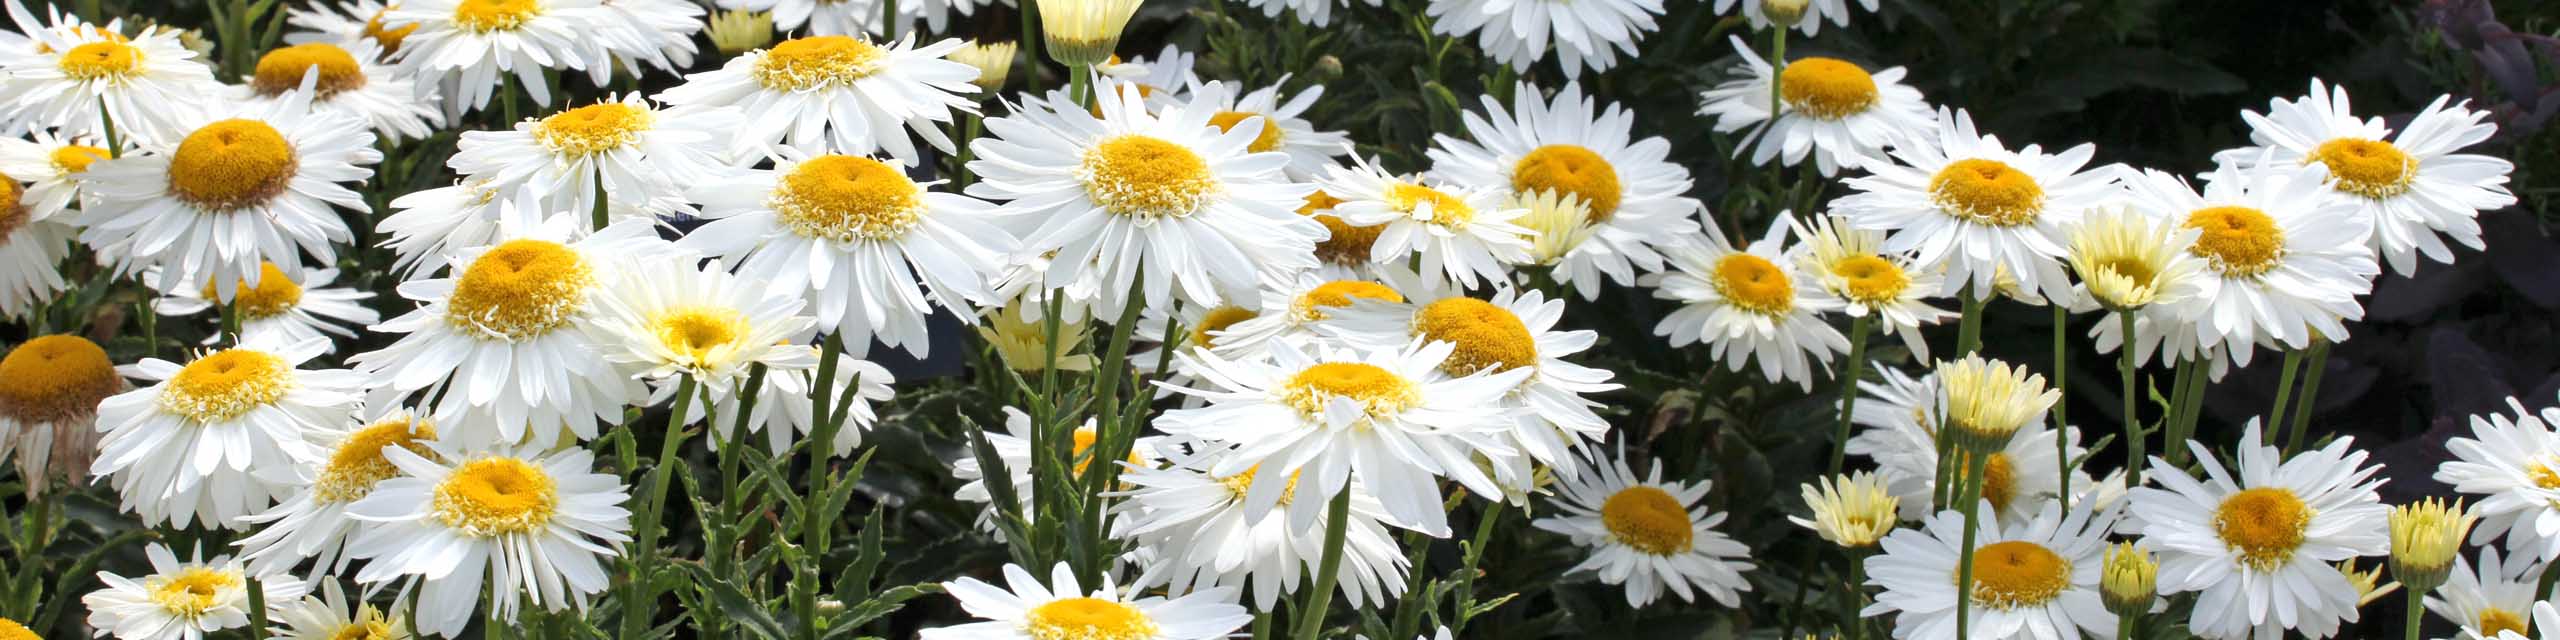 Shasta Daisies: Planting, Growing, and Caring for Daisy Flowers